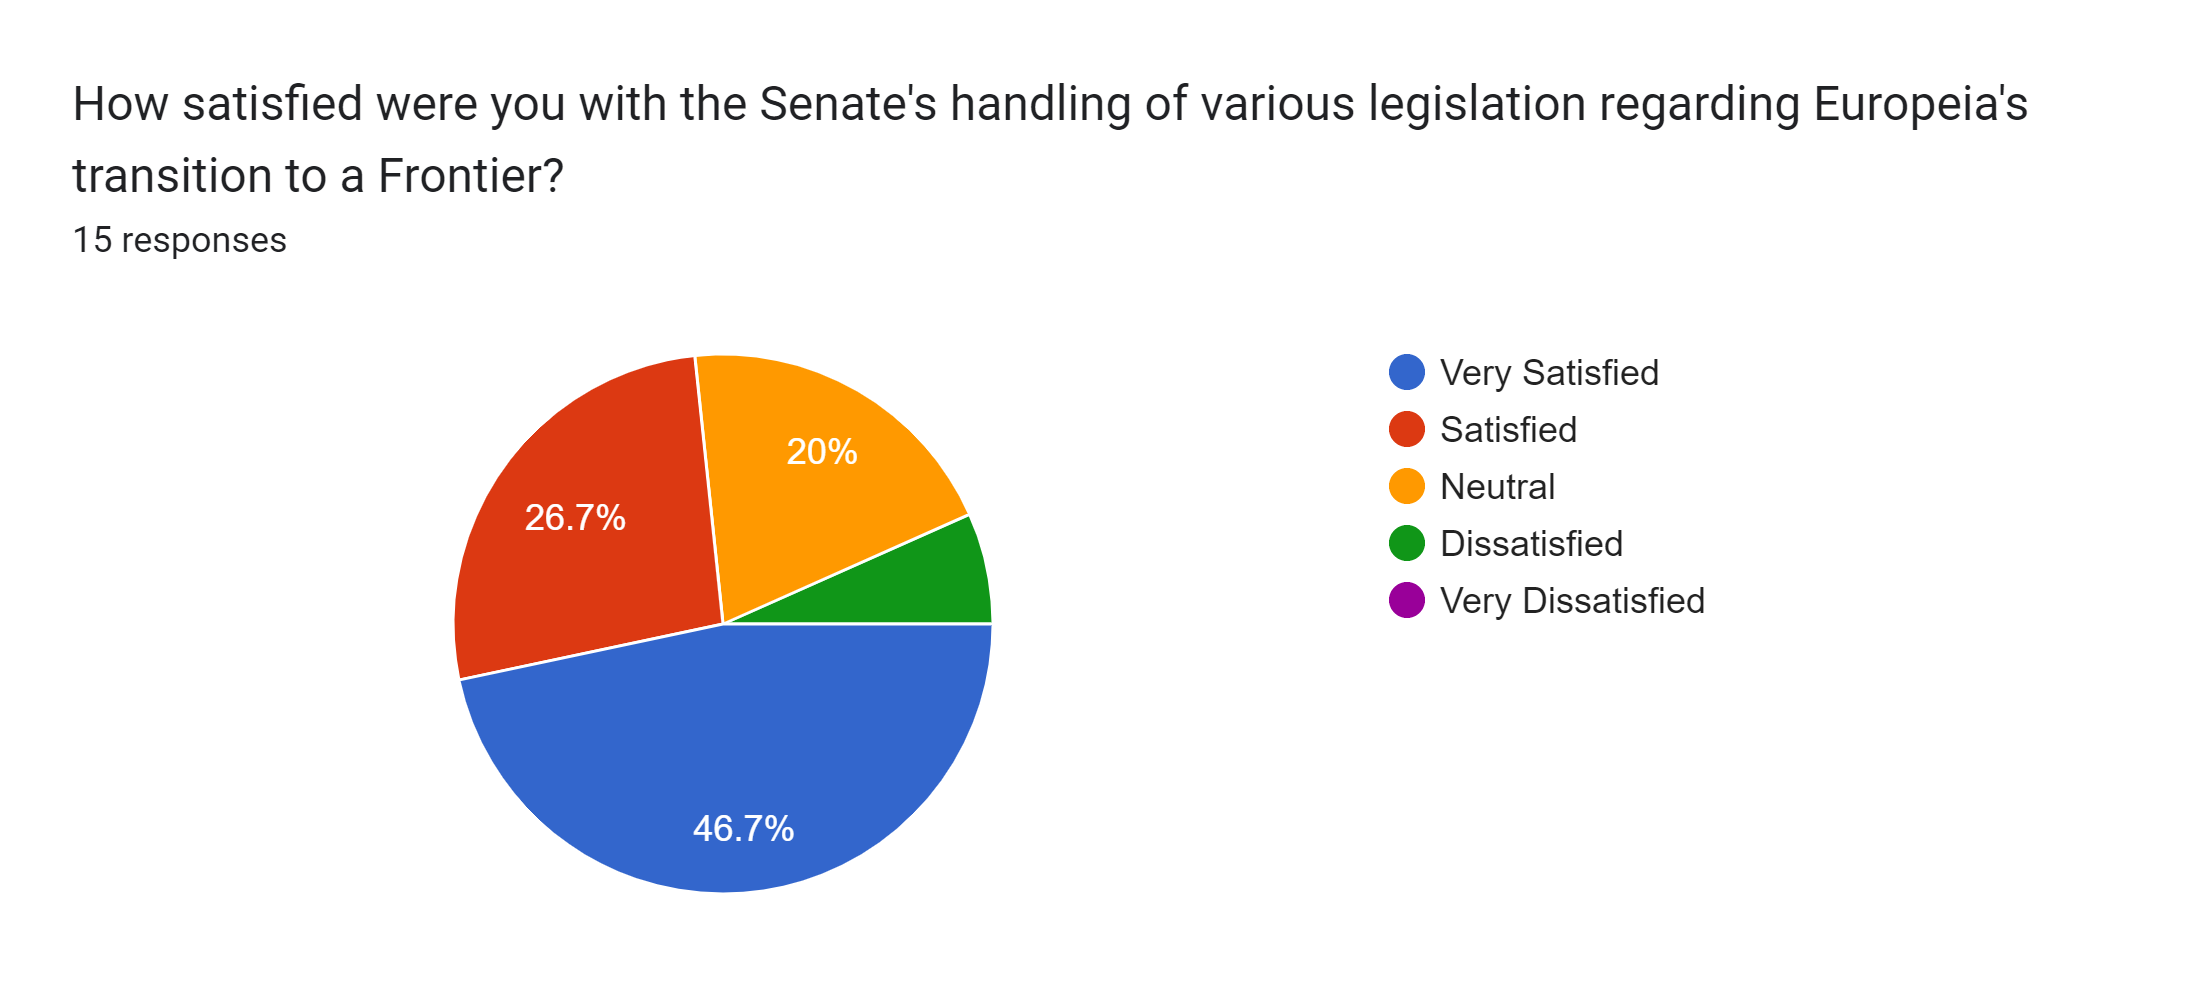 Forms response chart. Question title: How satisfied were you with the Senate's handling of various legislation regarding Europeia's transition to a Frontier?. Number of responses: 15 responses.